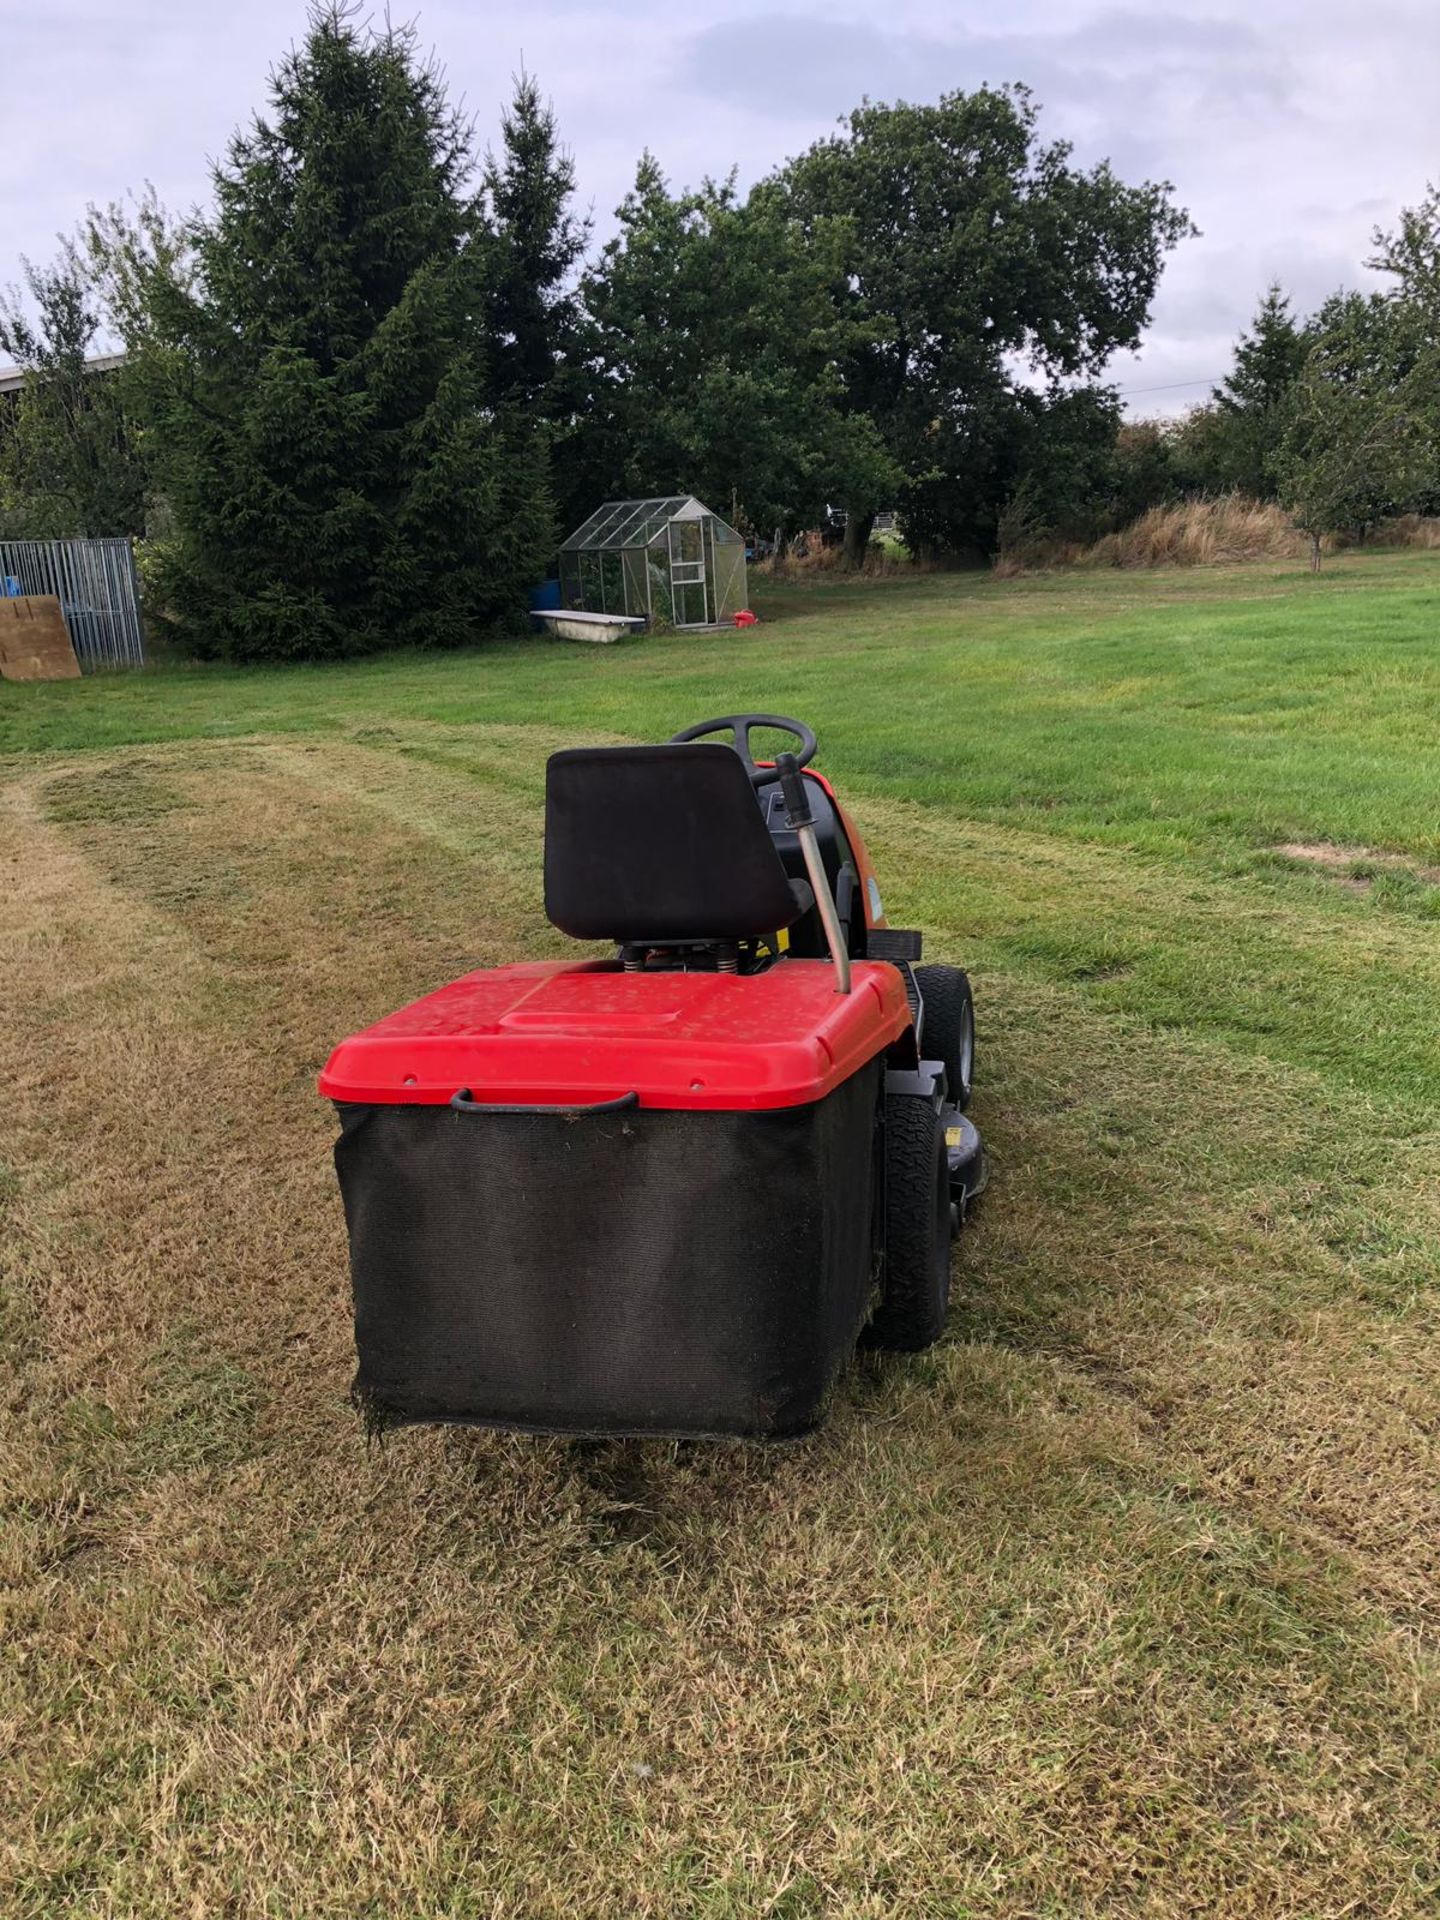 LAWNSTAR RIDE ON PETROL LAWN MOWER WITH REAR GRASS COLLECTOR, STARTS, RUNS AND CUTS *NO VAT* - Image 6 of 7